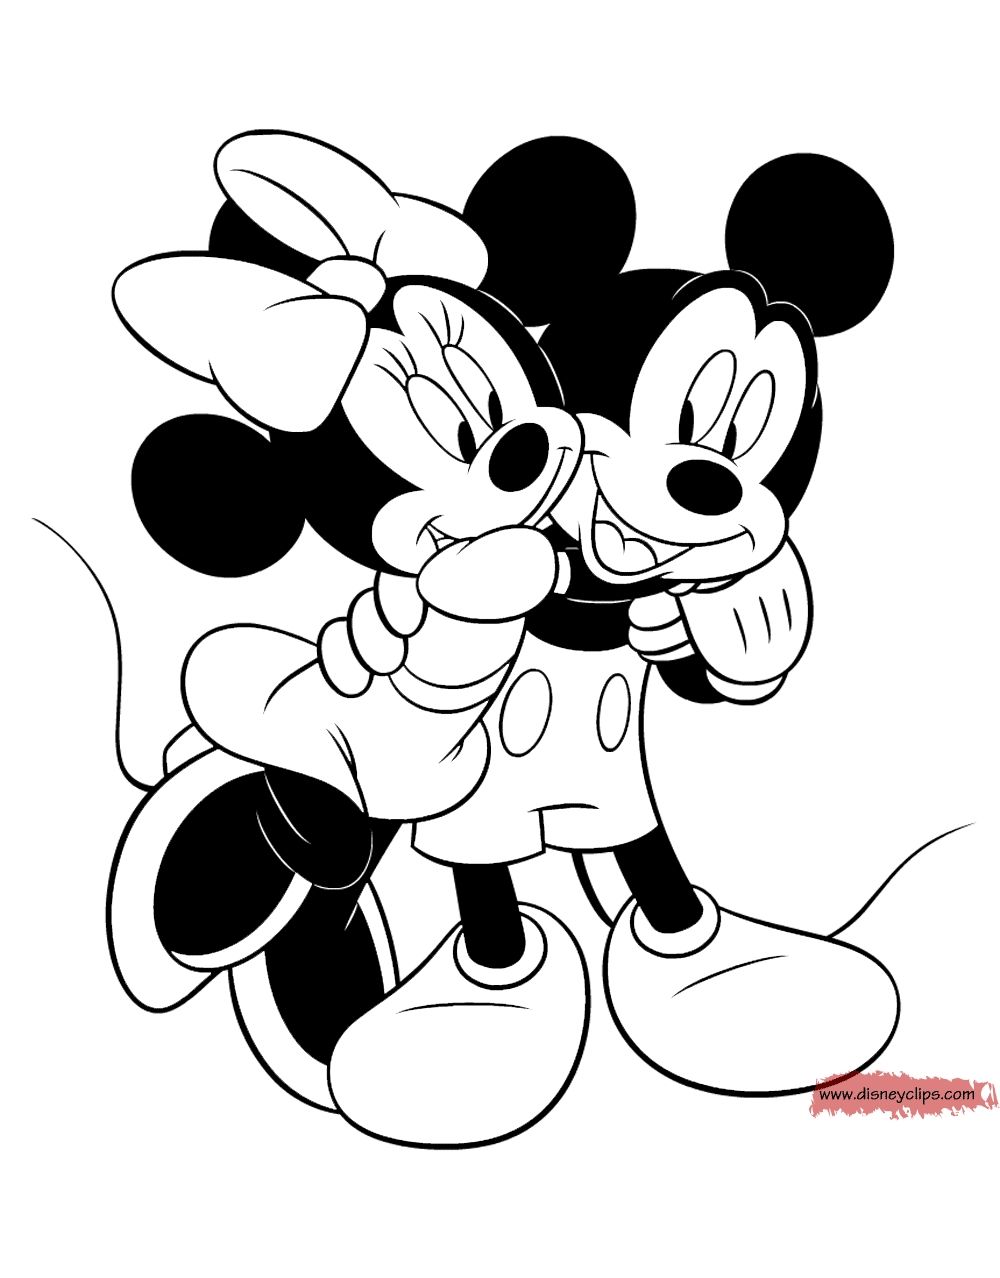 mickey-and-minnie-mouse-kissing-coloring-pages-at-getcolorings